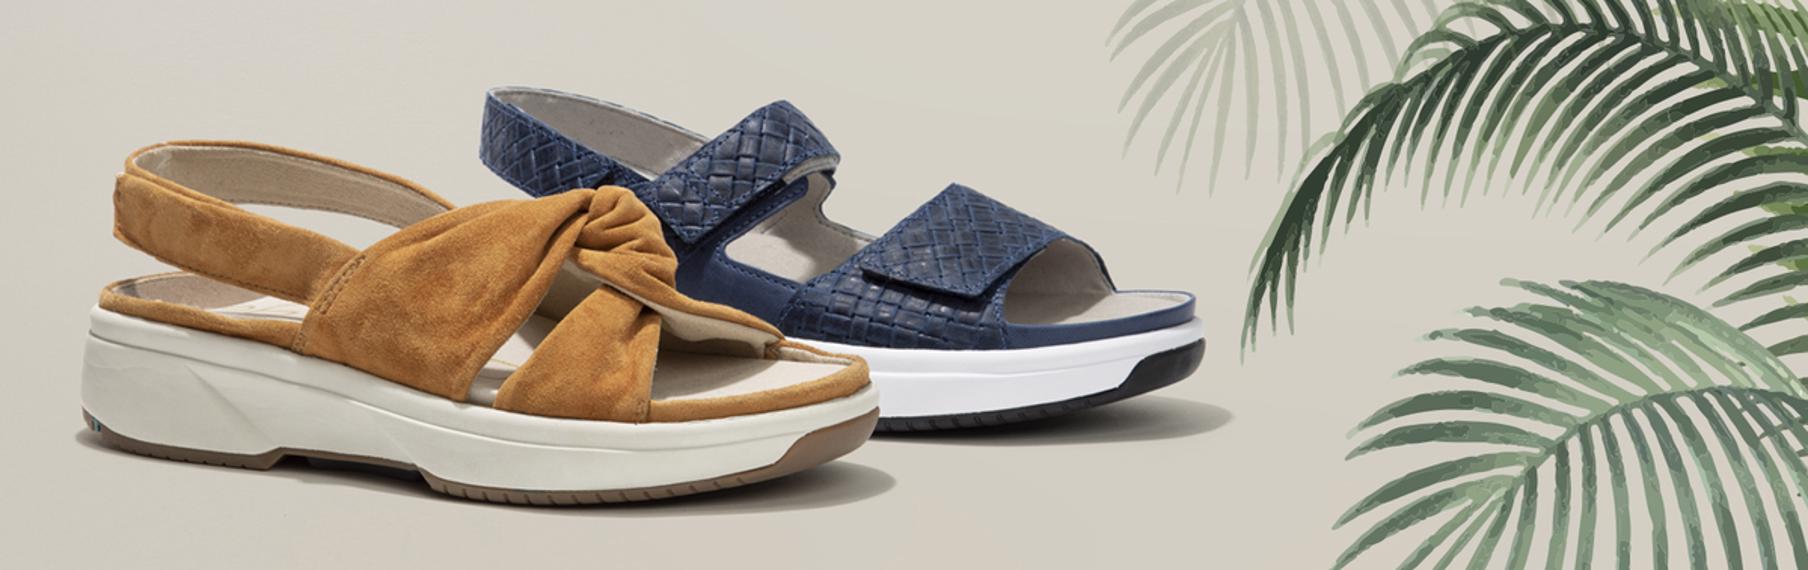 Sandals and flip-flops - These are the summer trends of 2022